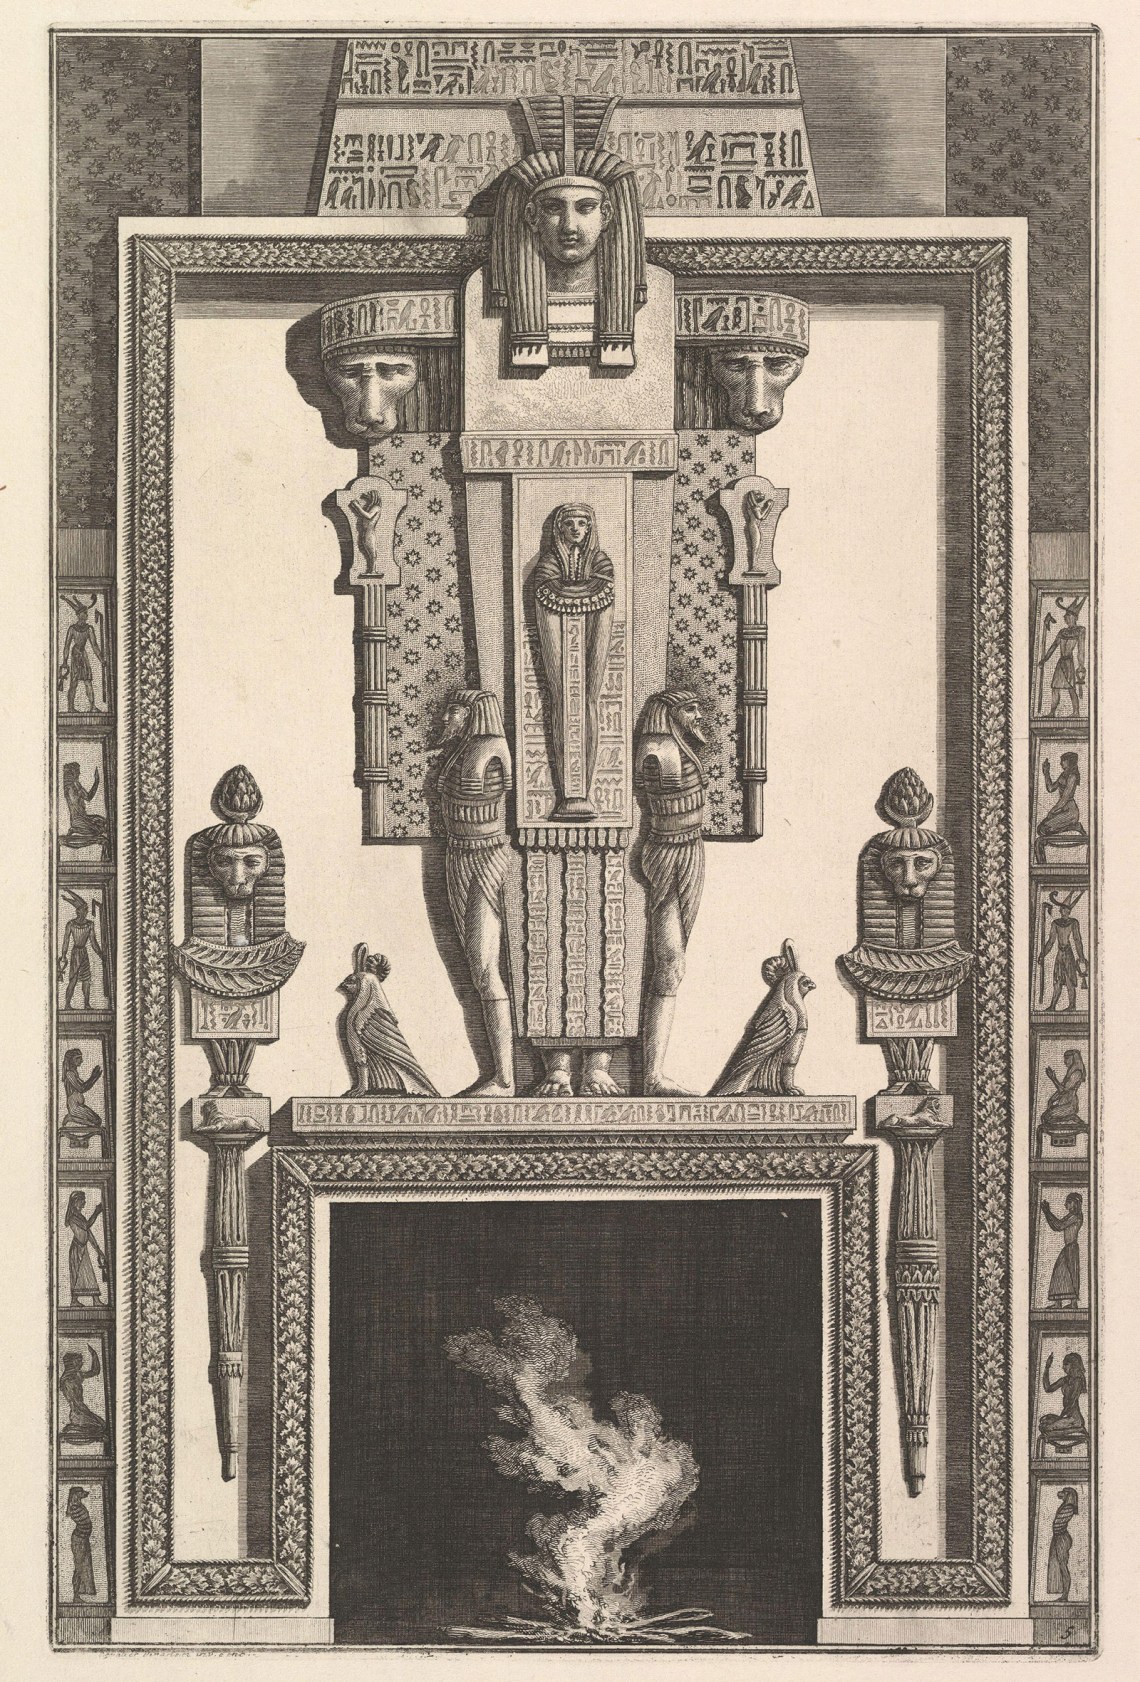 ‘Design for a Chimneypiece in Egyptian Style’; etching by Giovanni Battista Piranesi